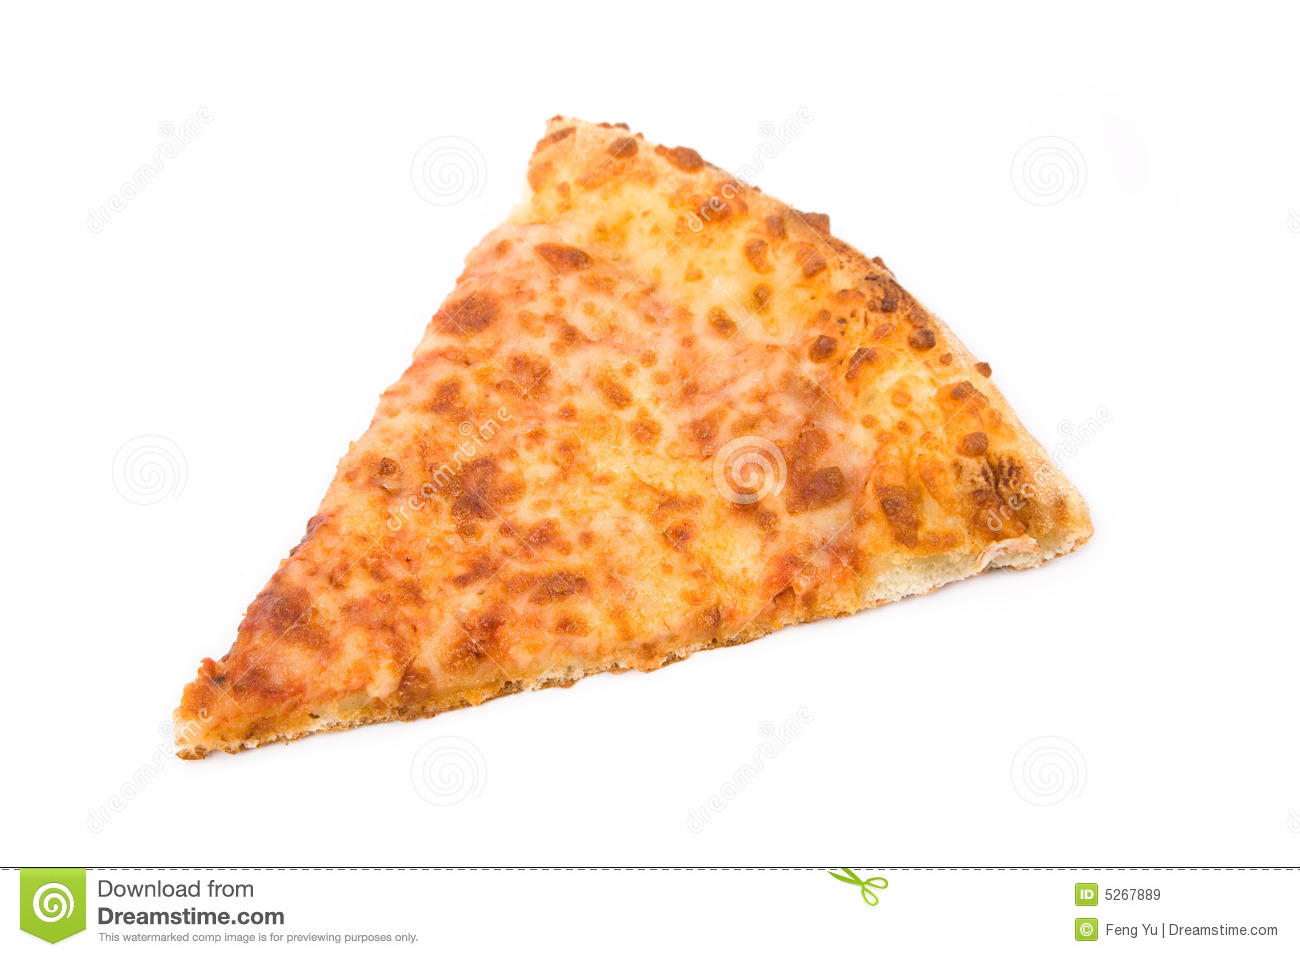 Cheese pizza clipart free 3 » Clipart Station.